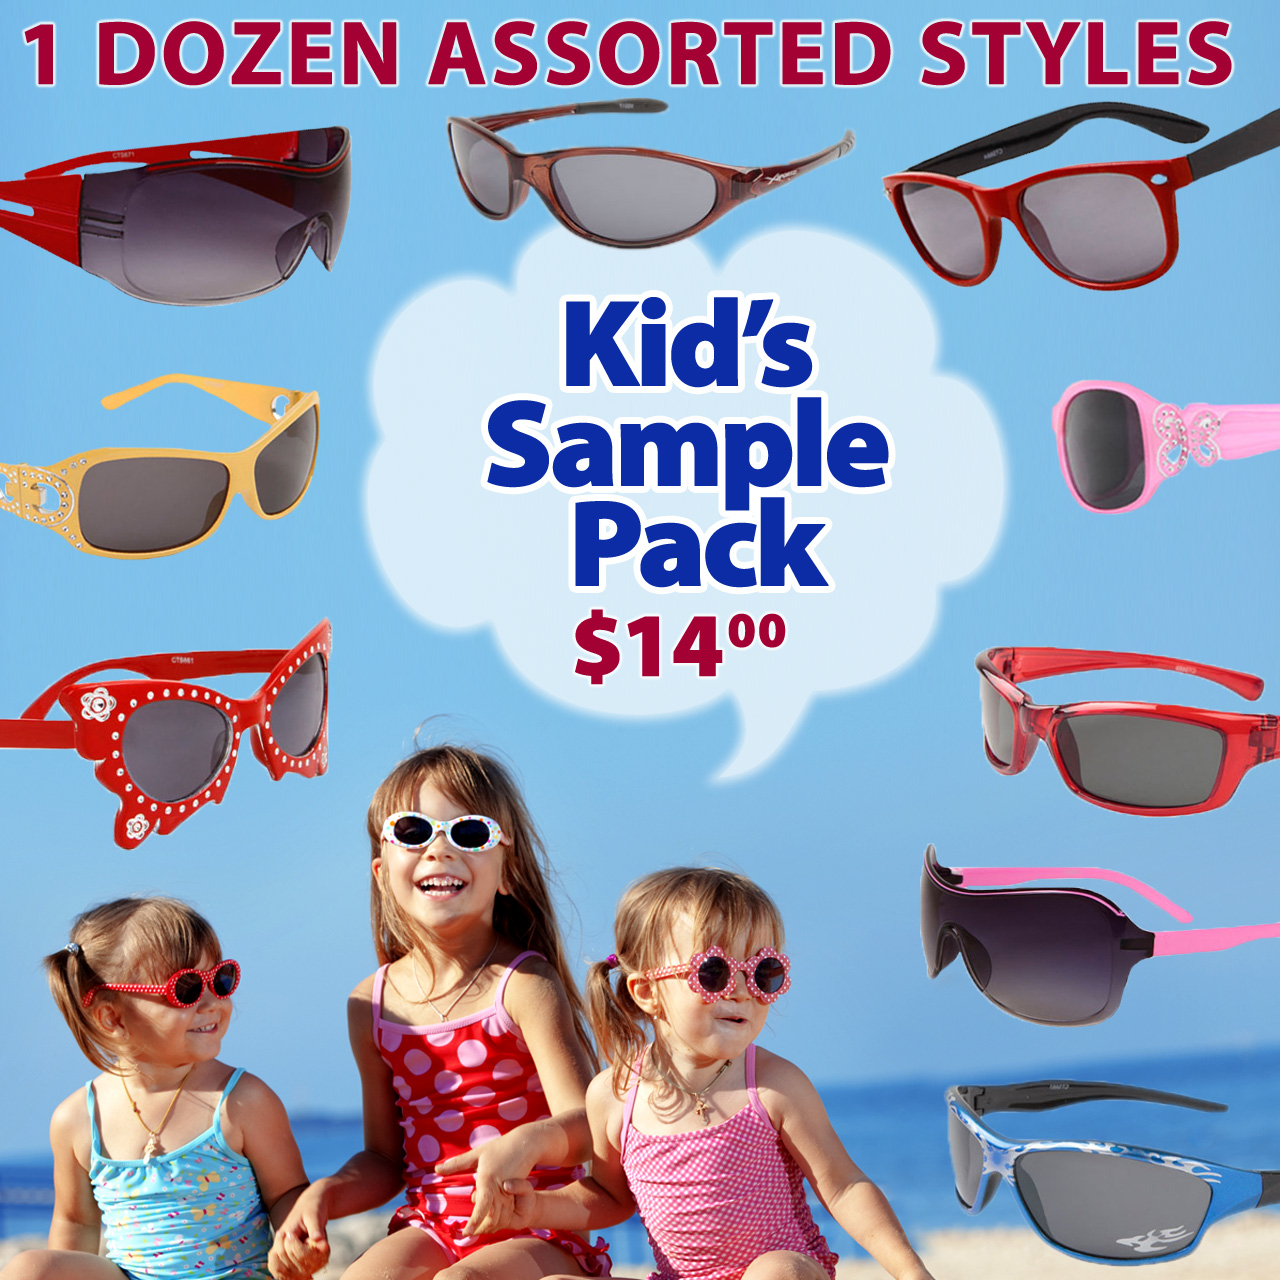 Package Deal 12 Pair Assorted Kid's Style Sunglasses SPK1 (12 pcs.) (Assorted Colors)